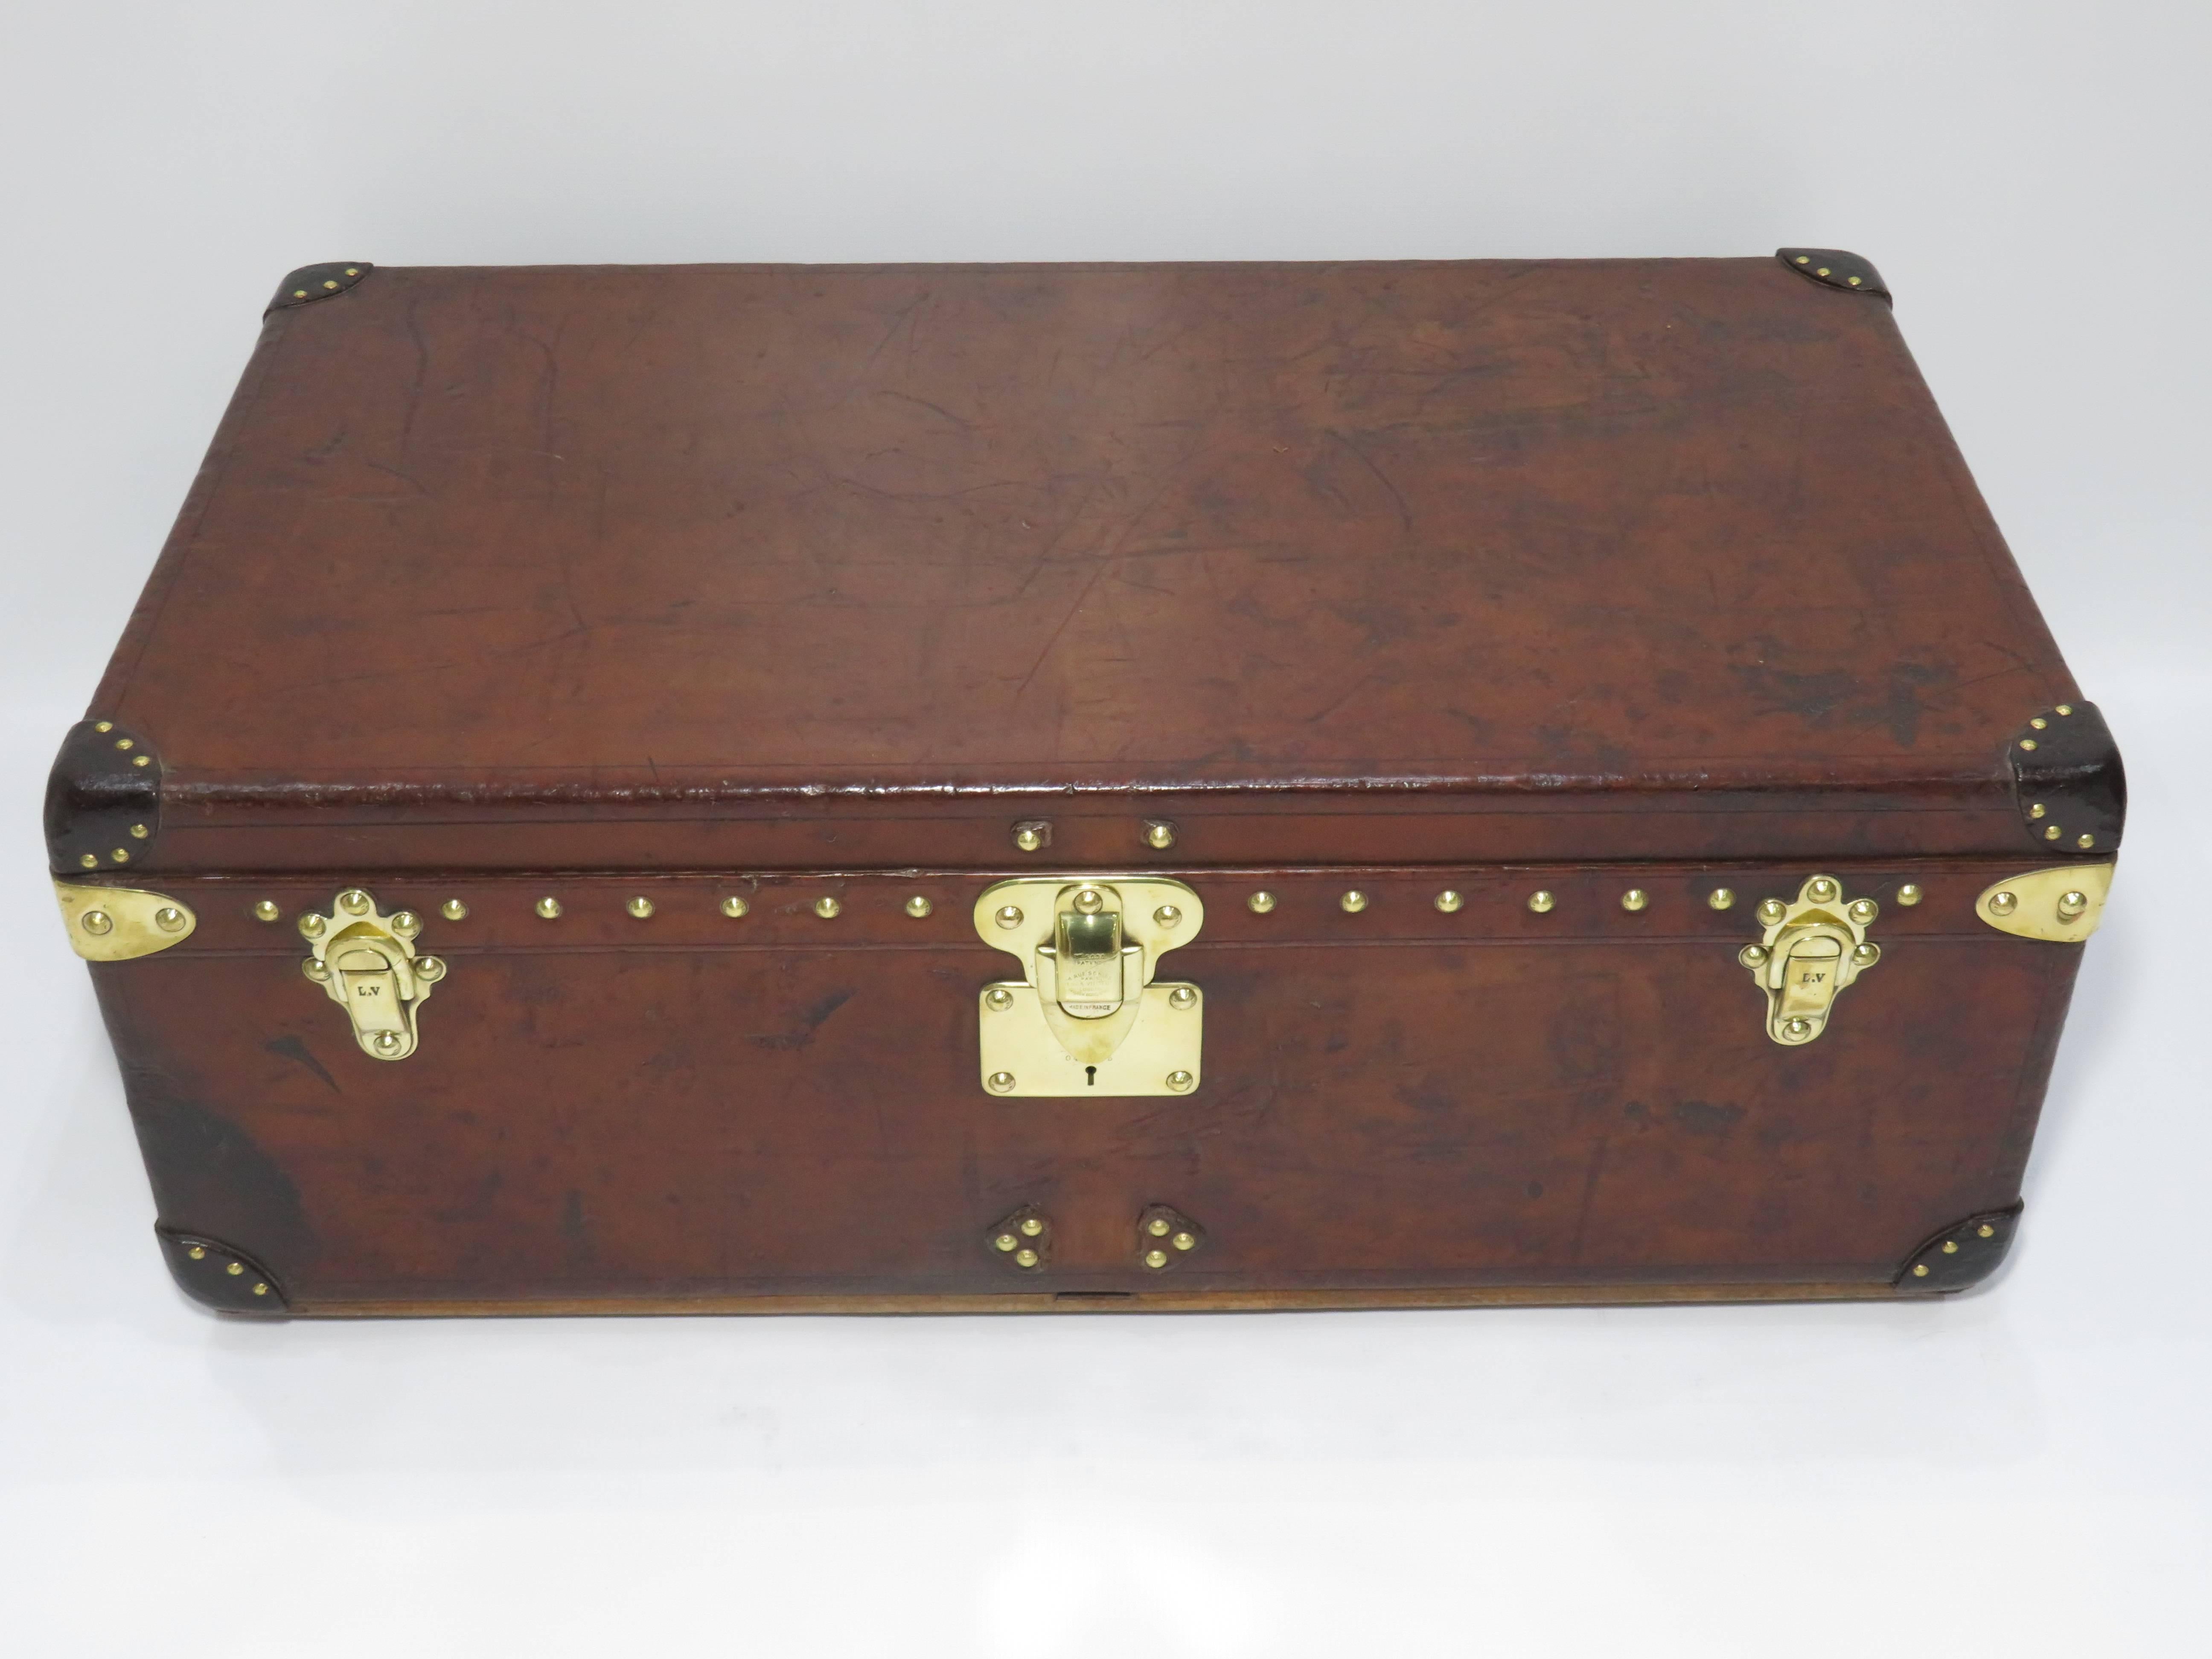 Early 20th century Louis Vuitton cowhide leather cabin trunk with a very nice patina, brass hardware and very clean interior.
Perfect size to be used as a coffee table.